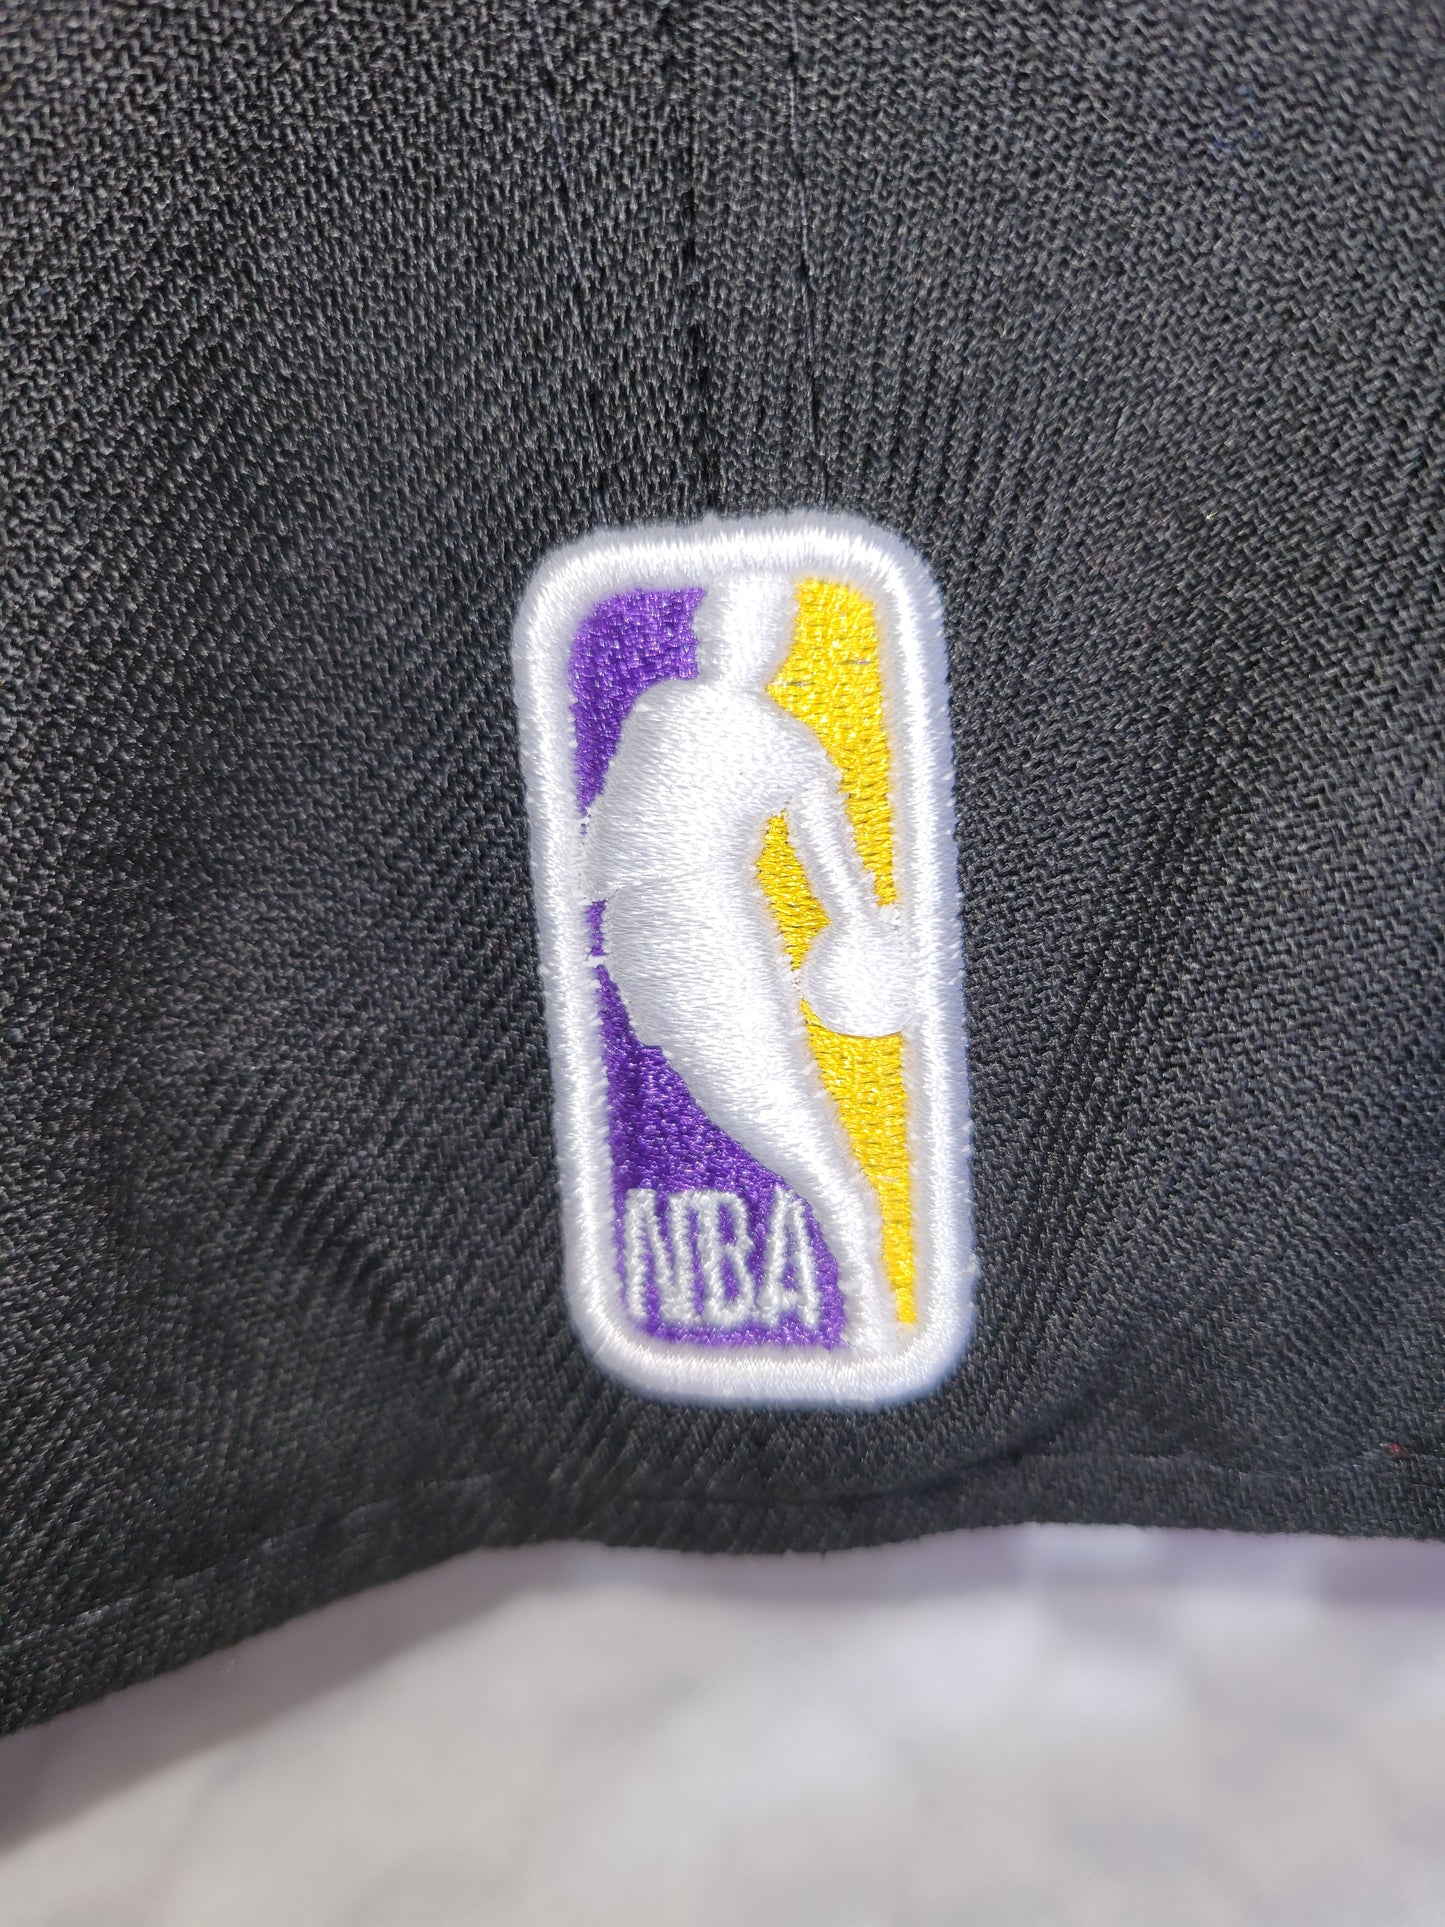 LA Lakers New Era Fitted Hat